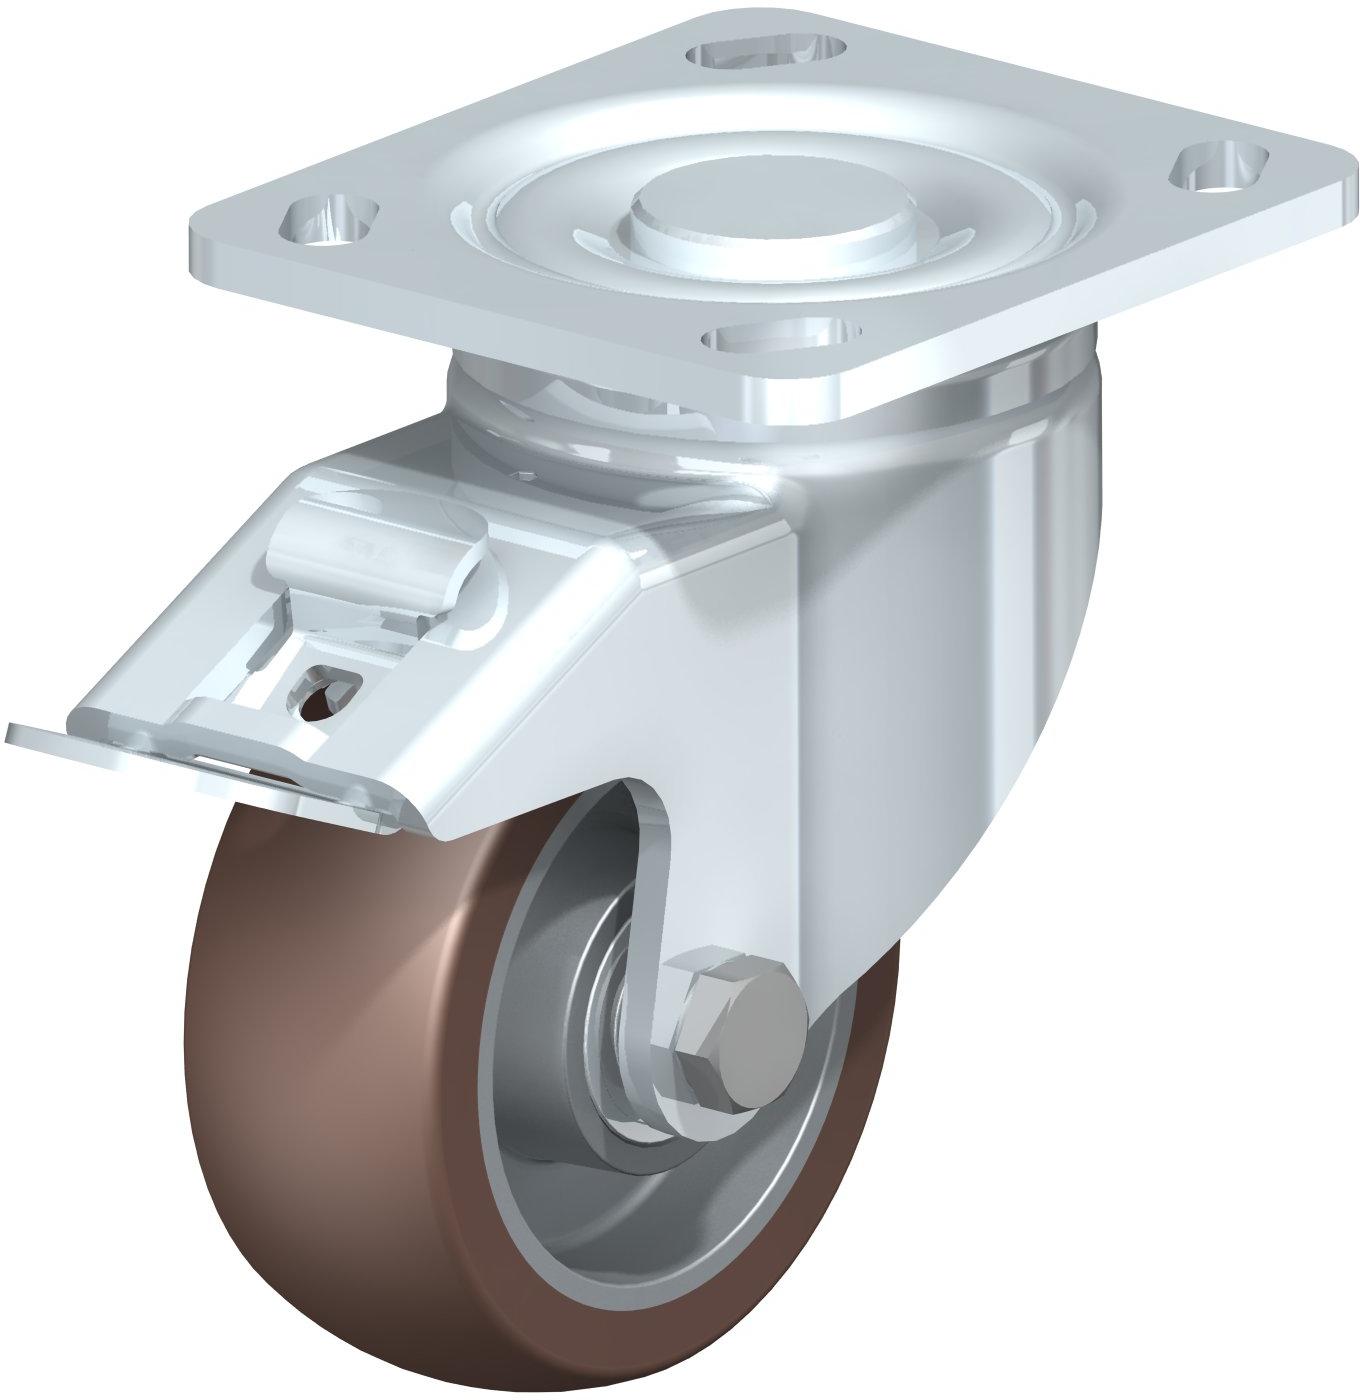 Heavy Duty Industrial Small Top Plate Casters - Swivel, Ball Bearing, Blickle Besthane Brown Polyurethane Tread On Aluminum Core Wheel, Stop-Fix Brake